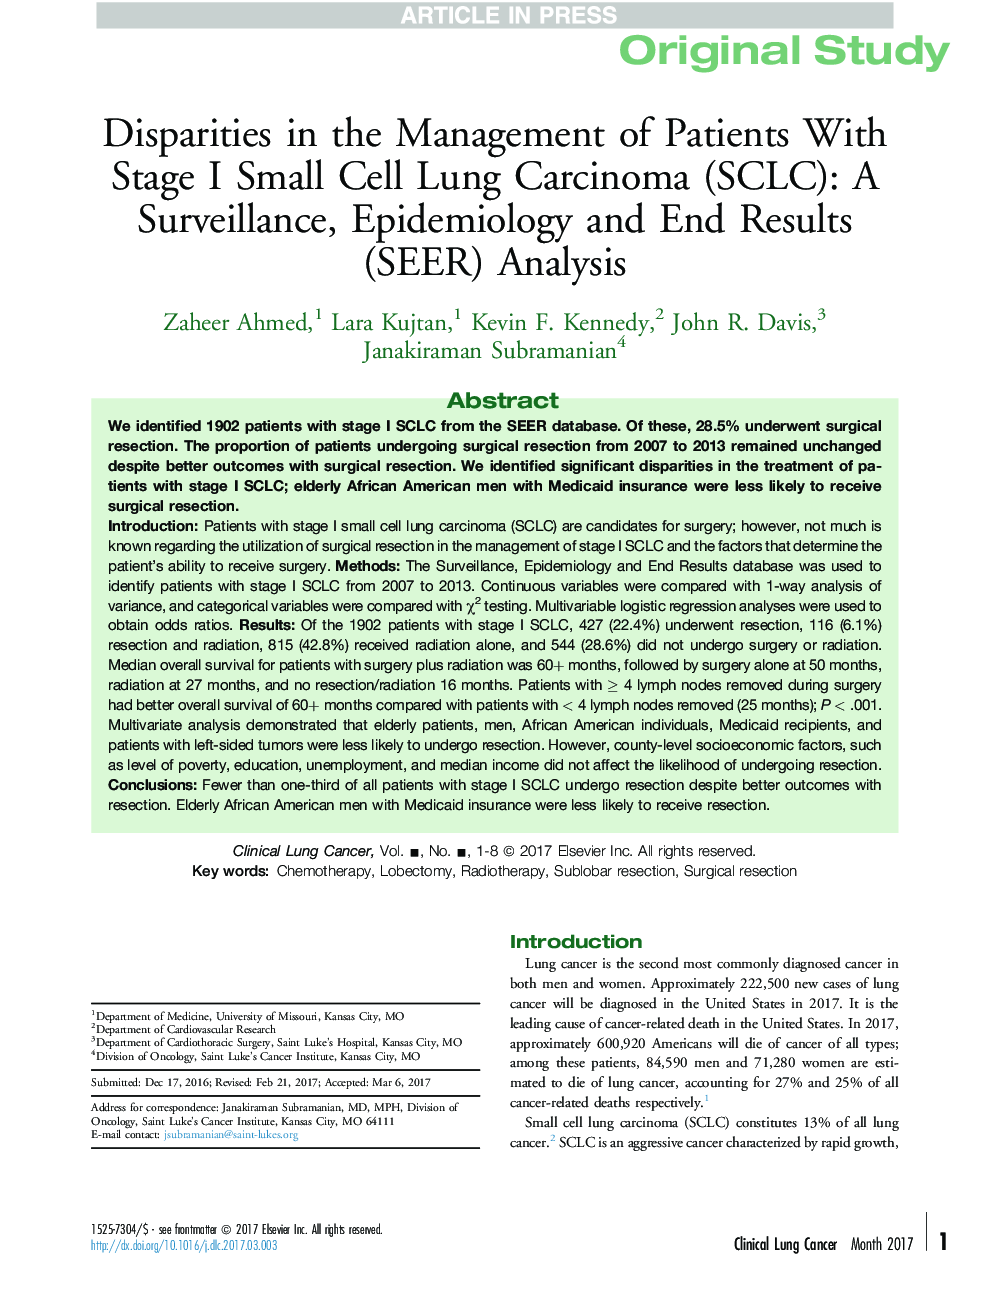 Disparities in the Management of Patients With Stage I Small Cell Lung Carcinoma (SCLC): A Surveillance, Epidemiology and End Results (SEER) Analysis